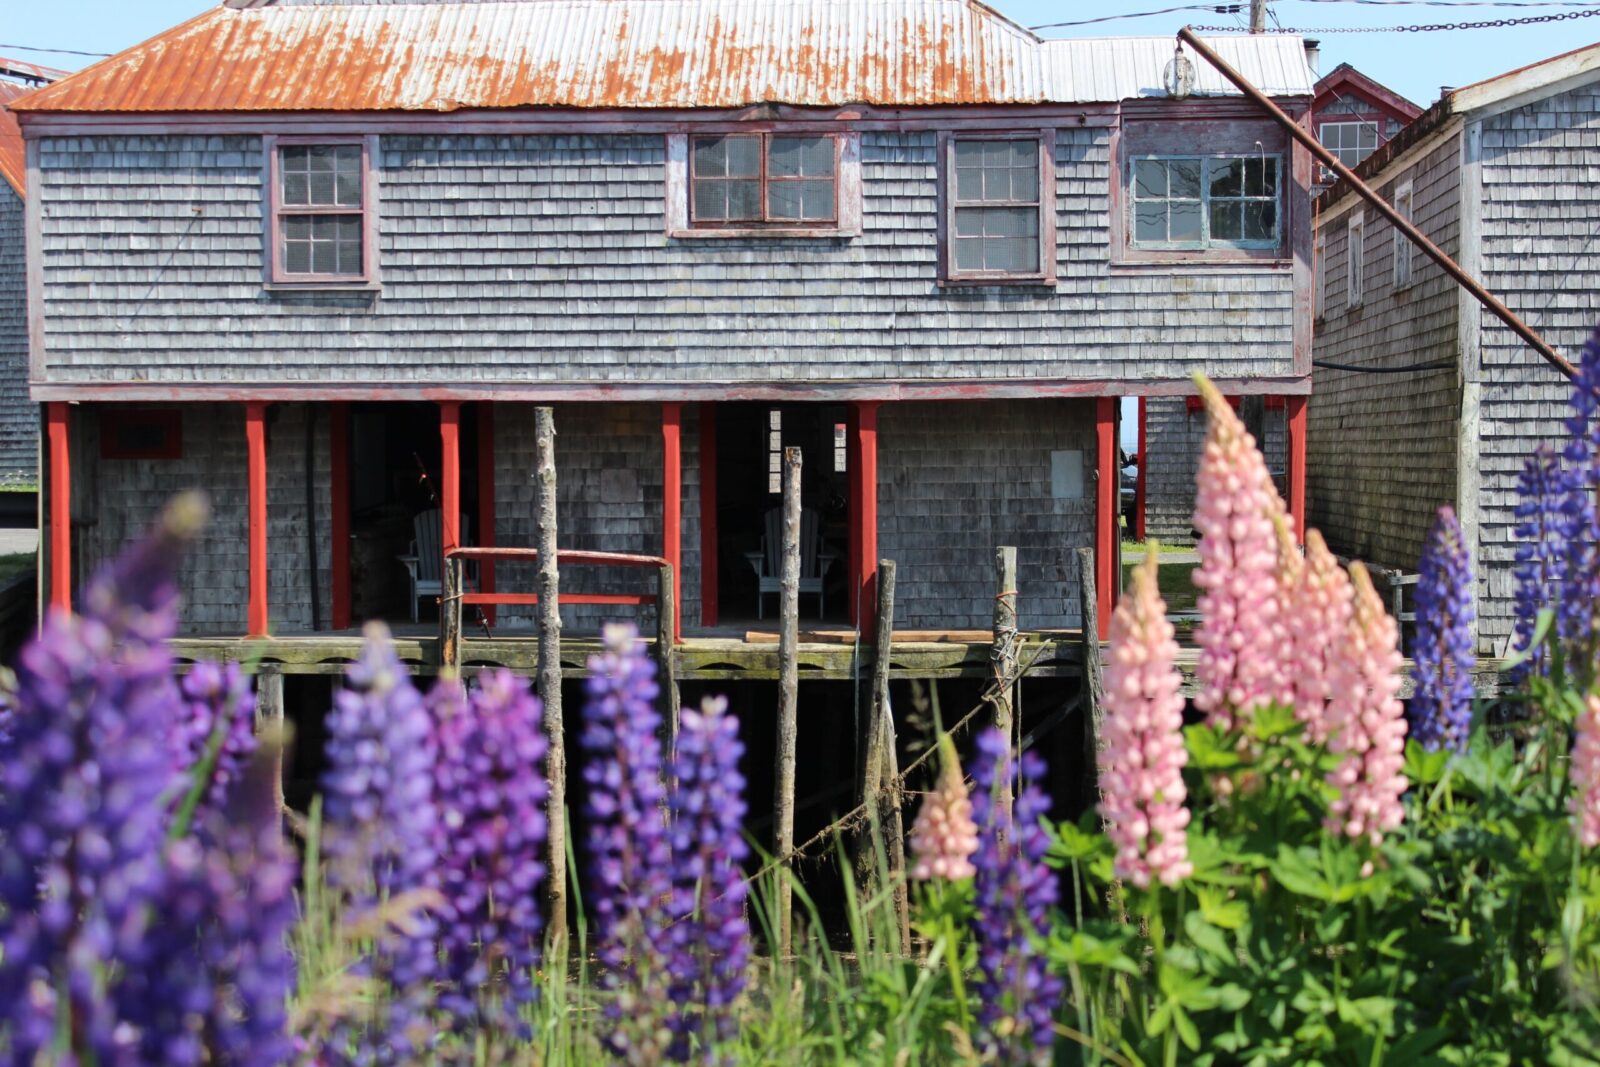 A wooden house with purple flowers in front of it.